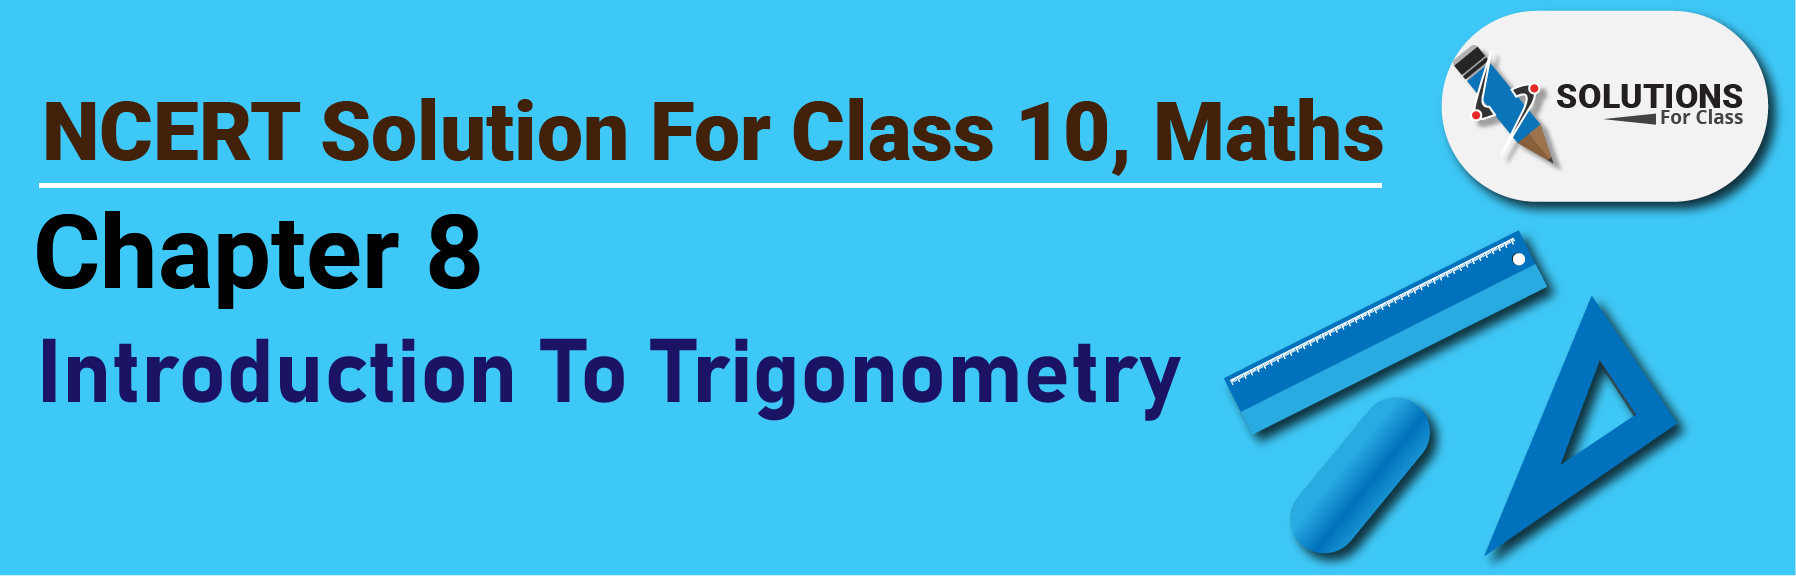 NCERT Solution For Class 10, Maths, Chapter 8, Introduction To Trigonometry